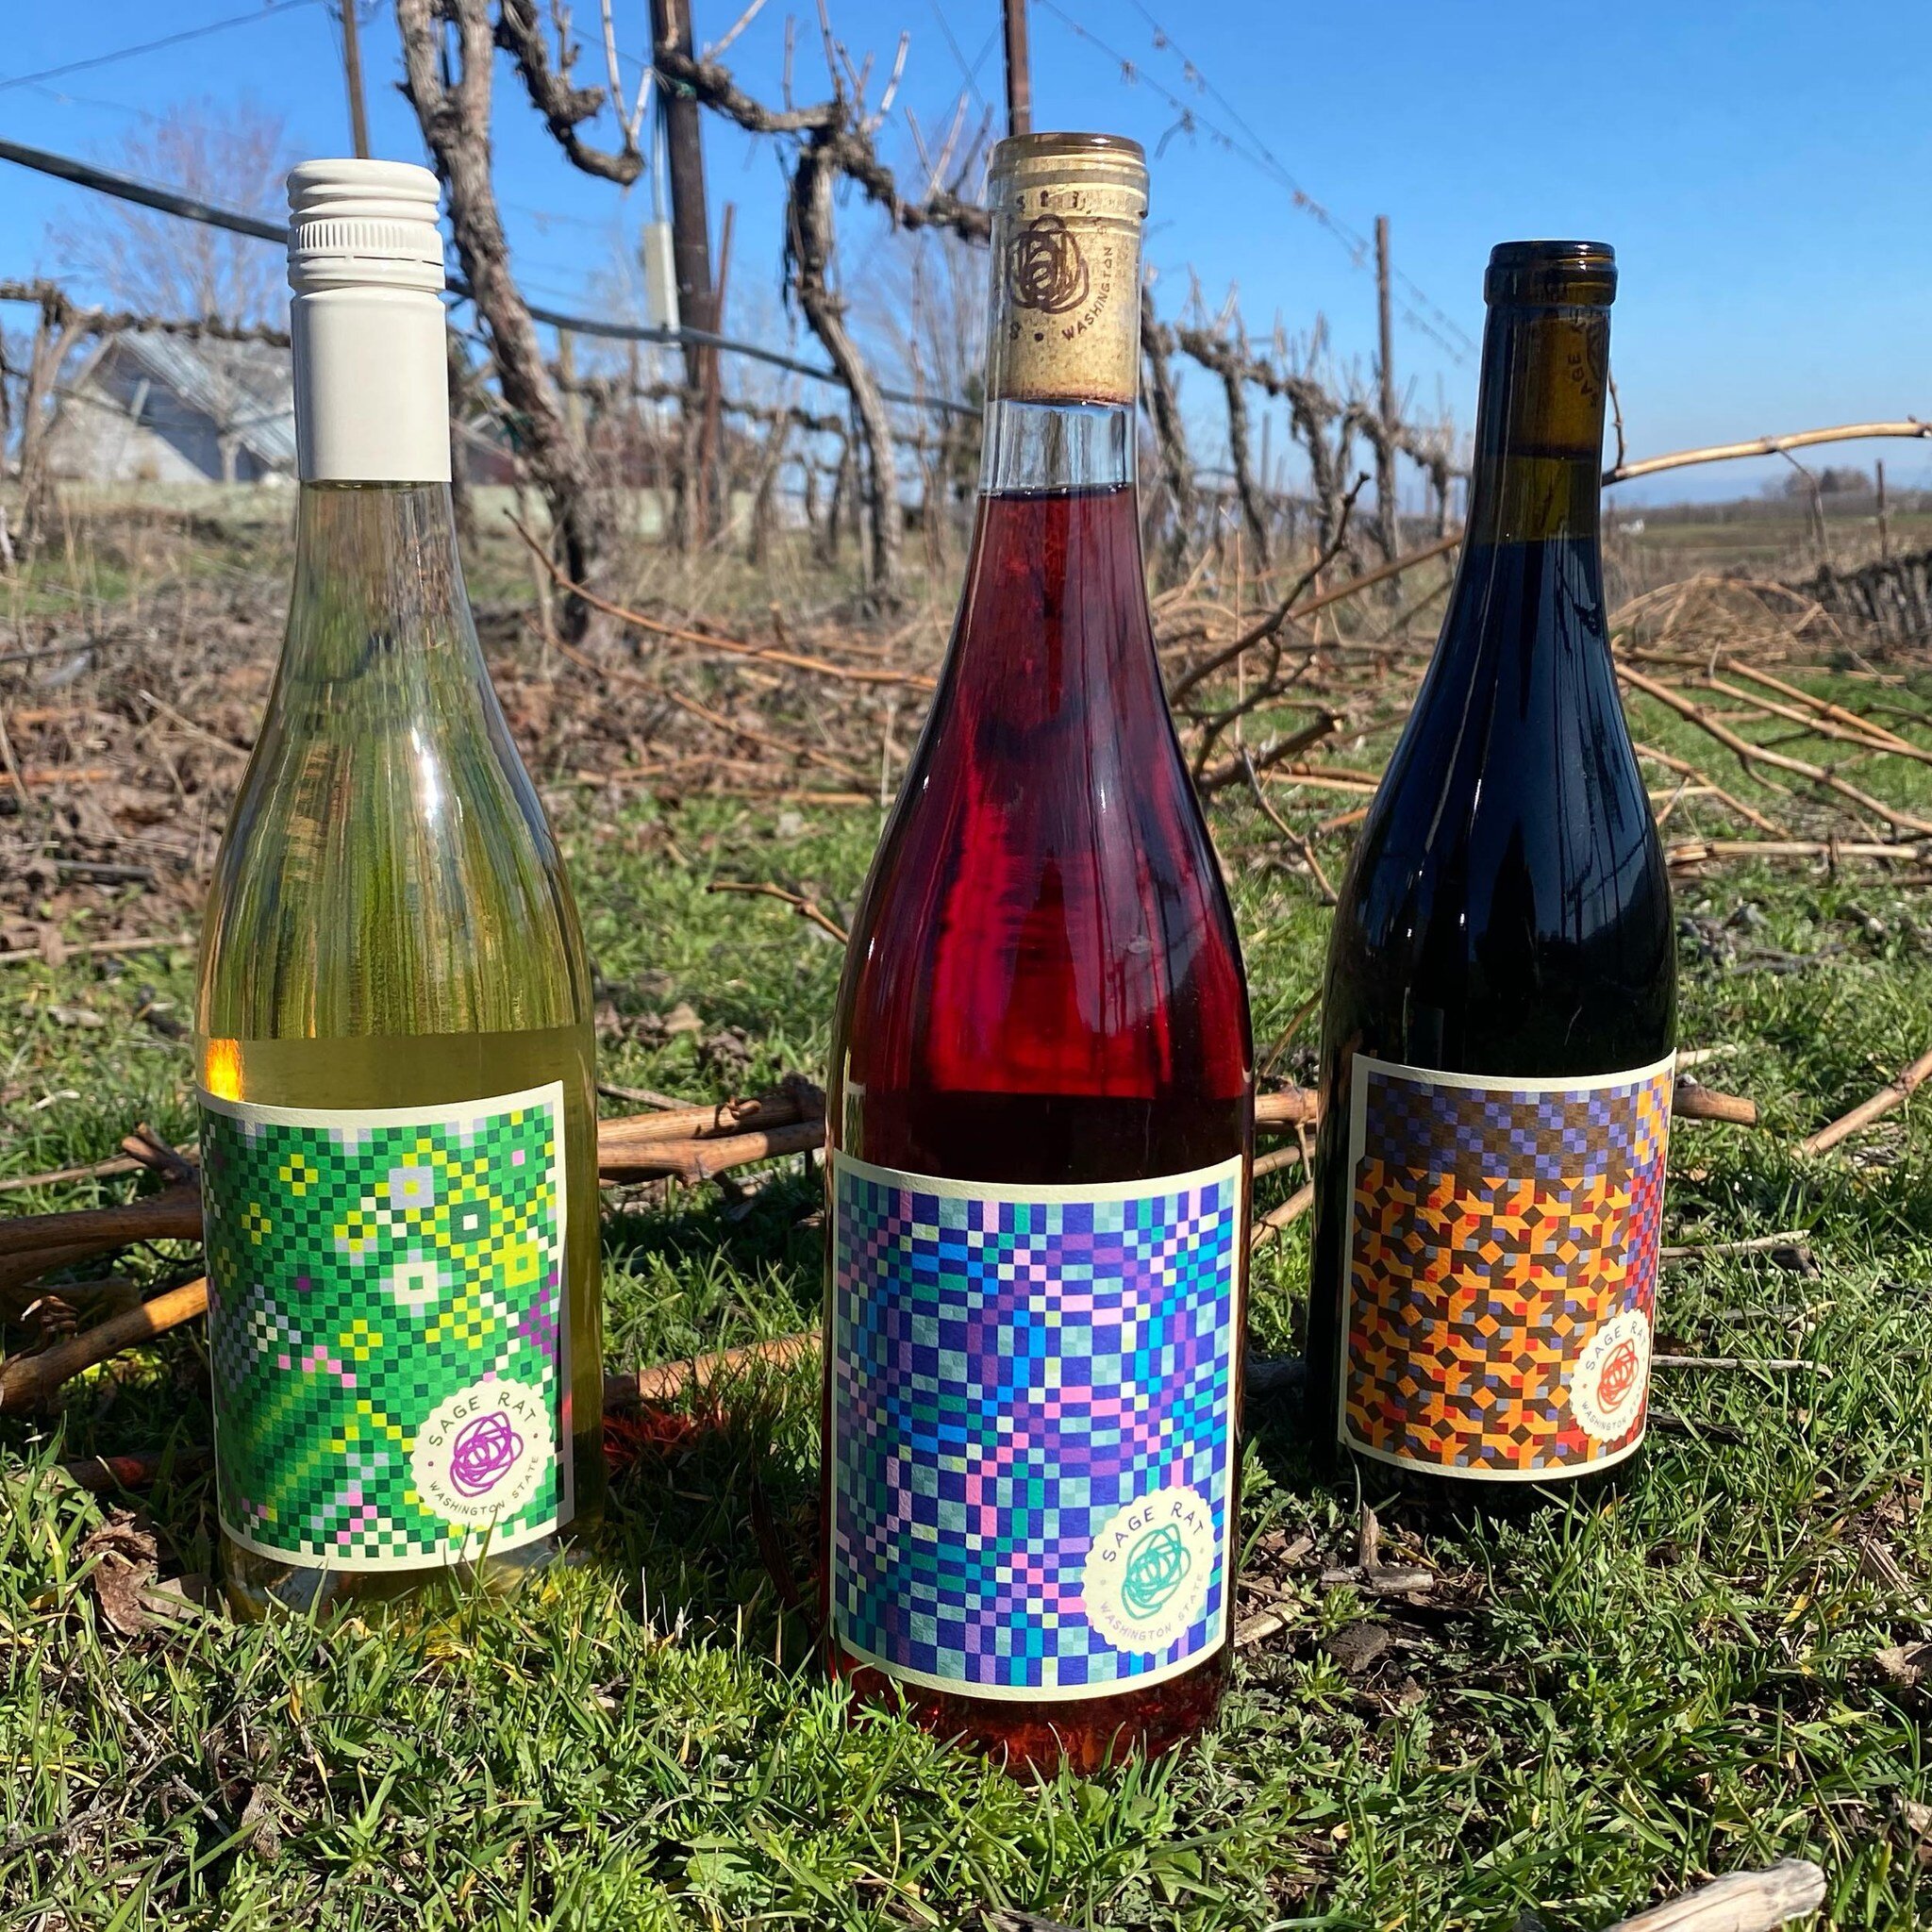 NEW WINE ALERT! 🚨 

Three new wines. Fresh off the bottling line.

2023 Ratto Bianco: High acid white blend of 50% Riesling, 25% Pinot Grigio and 25% Orange Muscat. 

2023 Roza: Newest wine in the Sage Rat lineup. Heavy extraction ros&eacute; made o